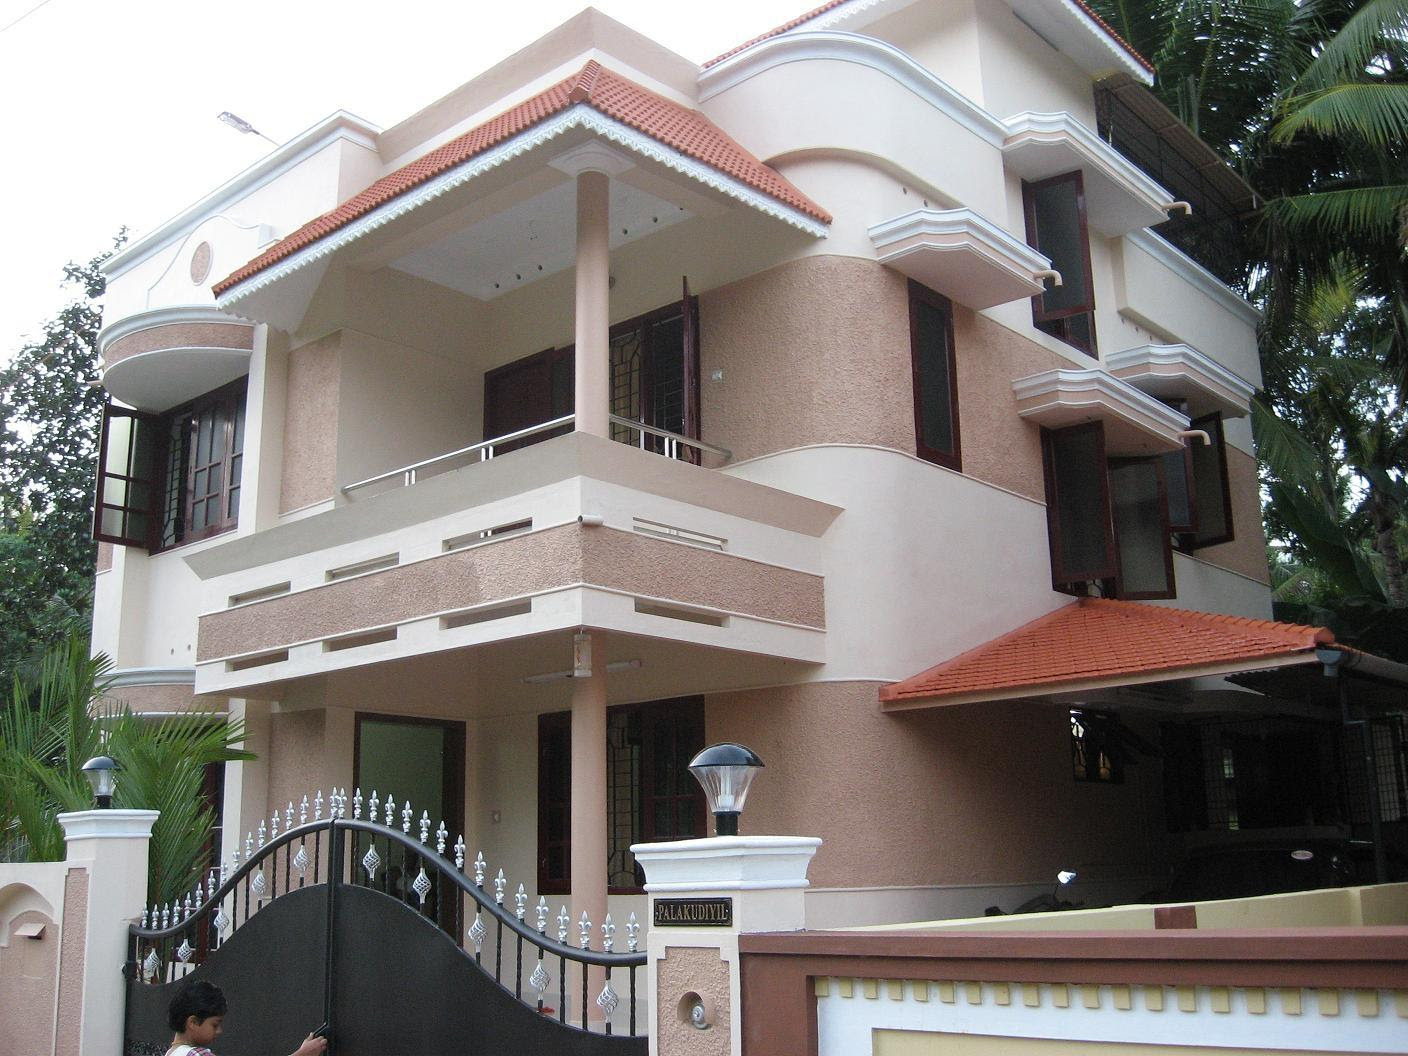  Front  Elevation  Photos Of Houses In India  HomeDesignPictures